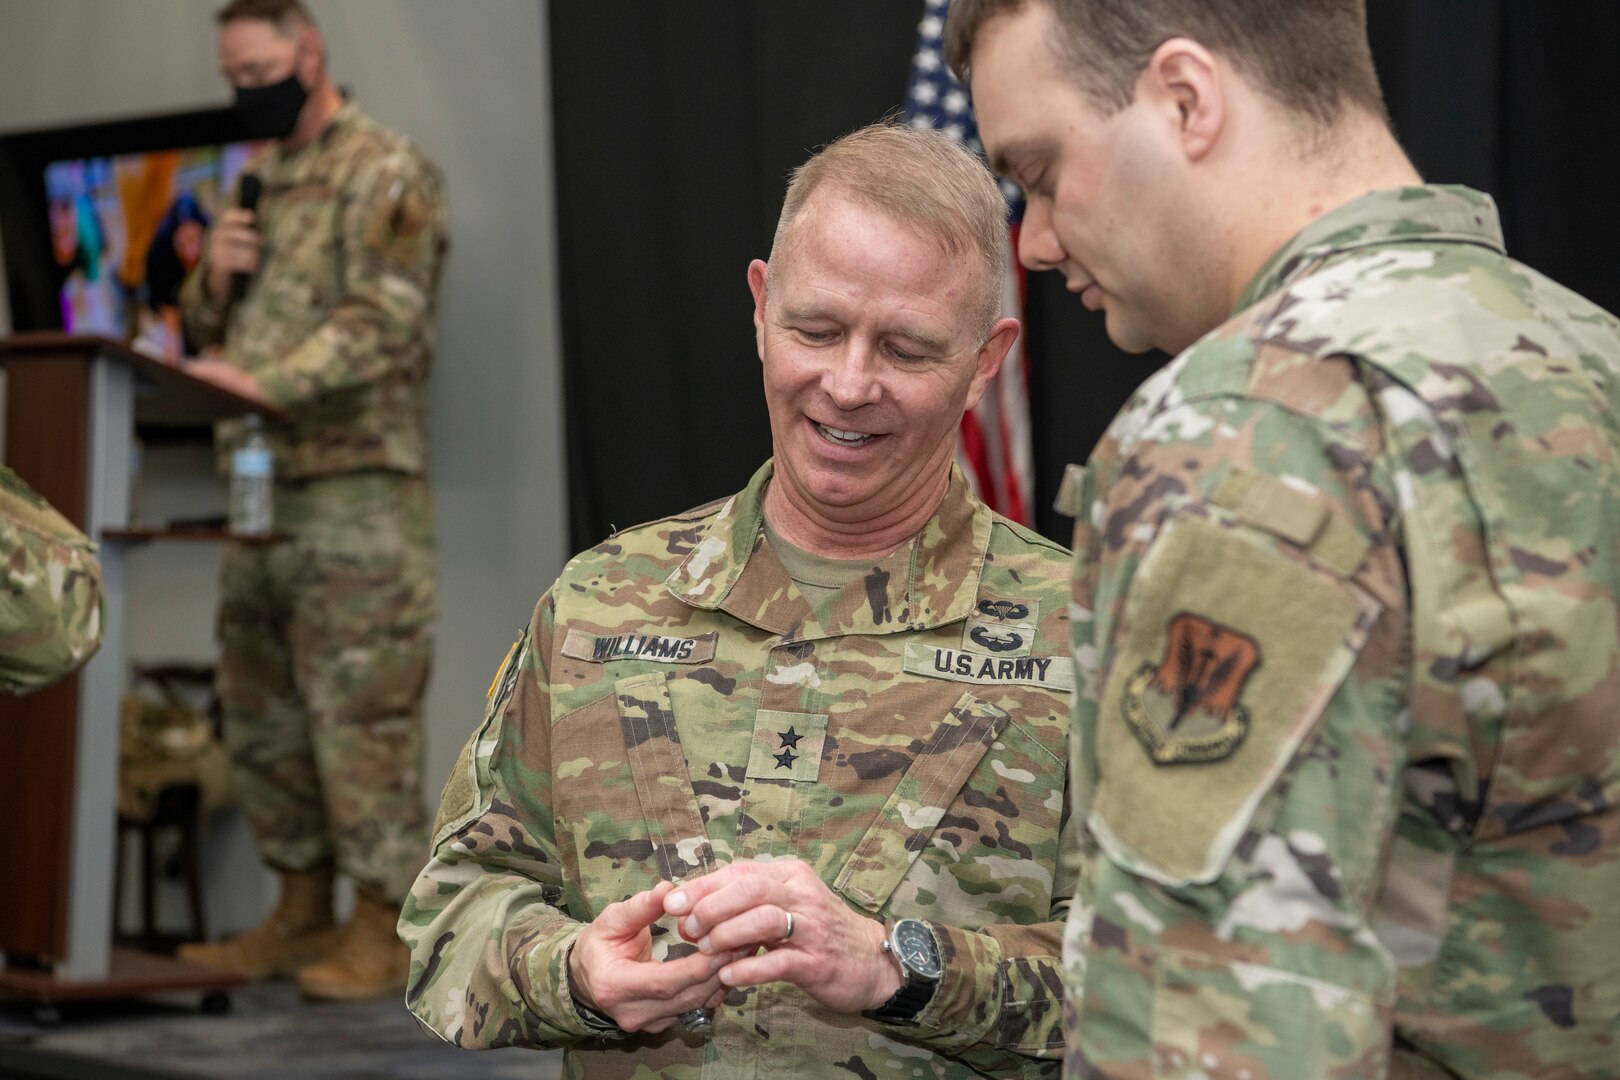 Maj. Gen. Timothy P. Williams, the Adjutant General of Virginia, presents his unique challenge coin at an end of mobilization ceremony Feb. 25, 2022, in Hampton, Virginia.